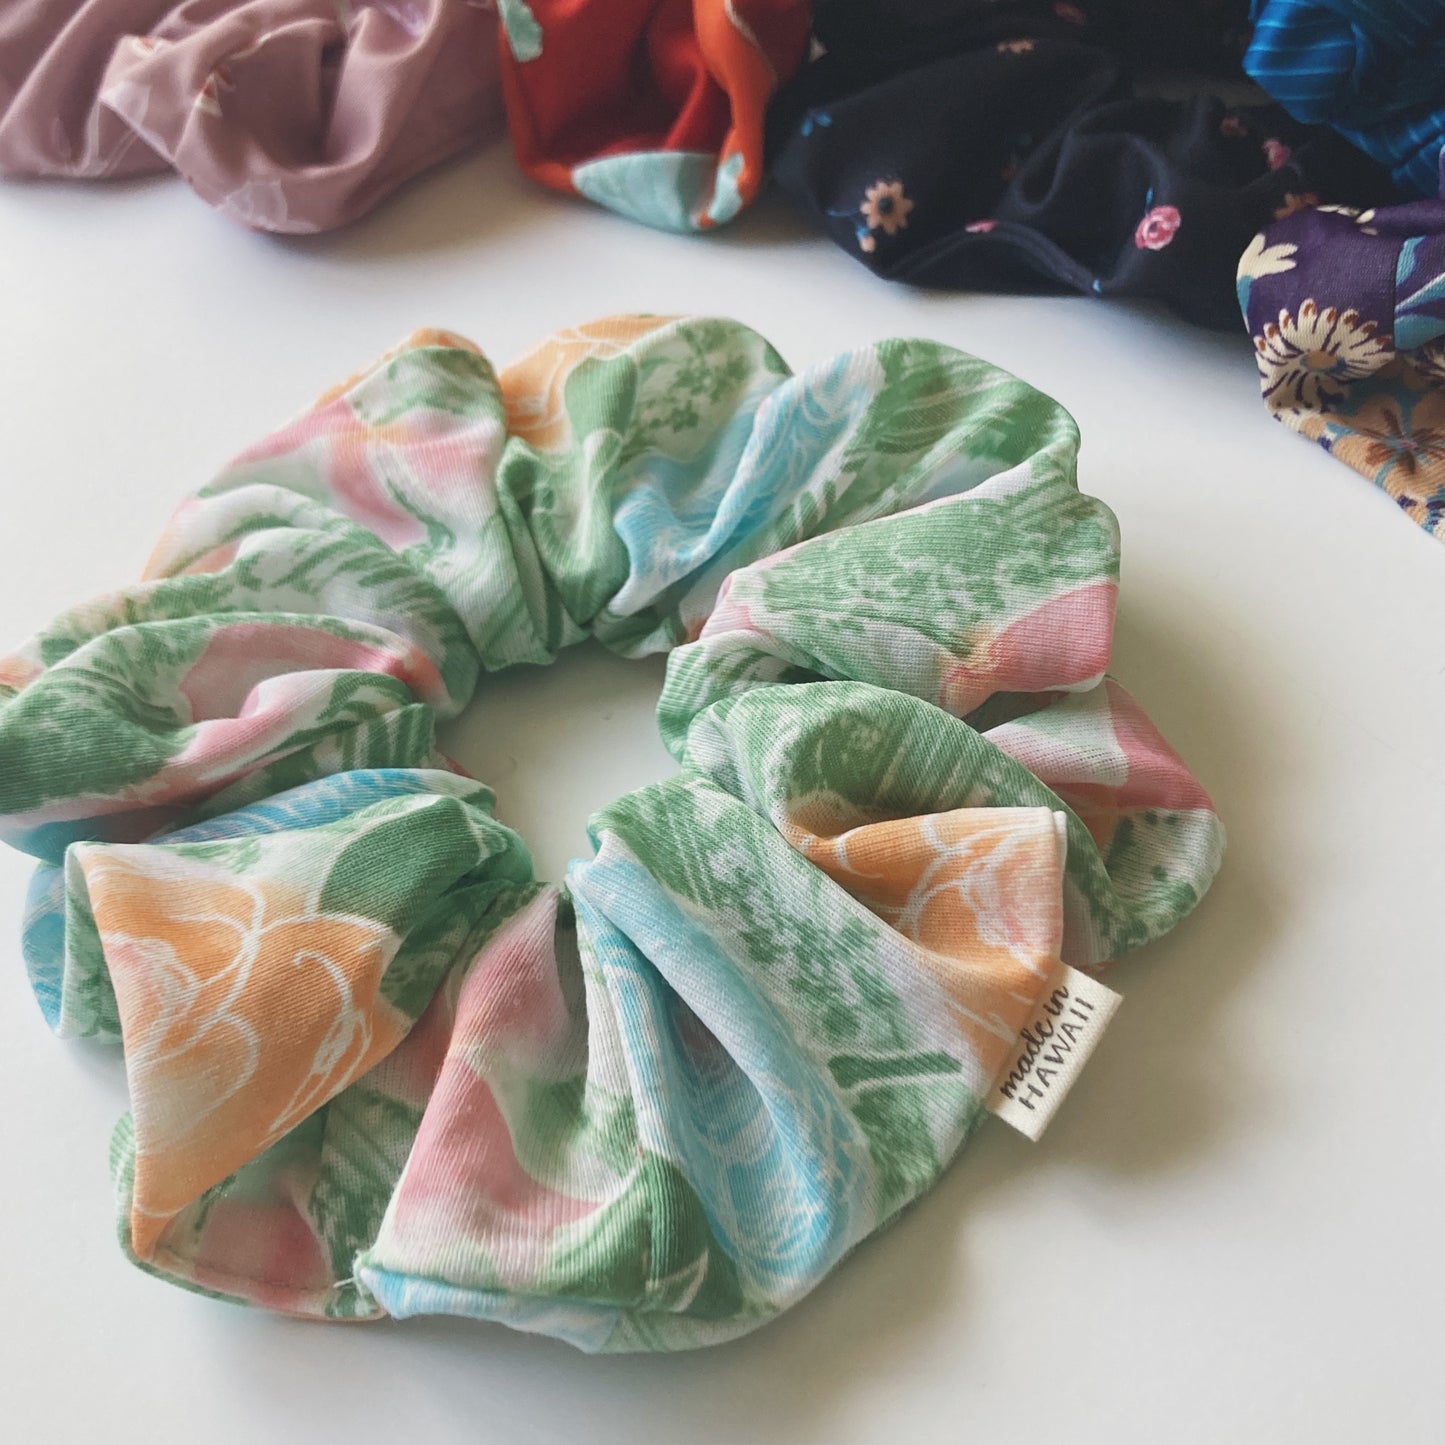 Hana Hou // SCRUNCHIE 005 // Made in Hawaii with upcycled textiles